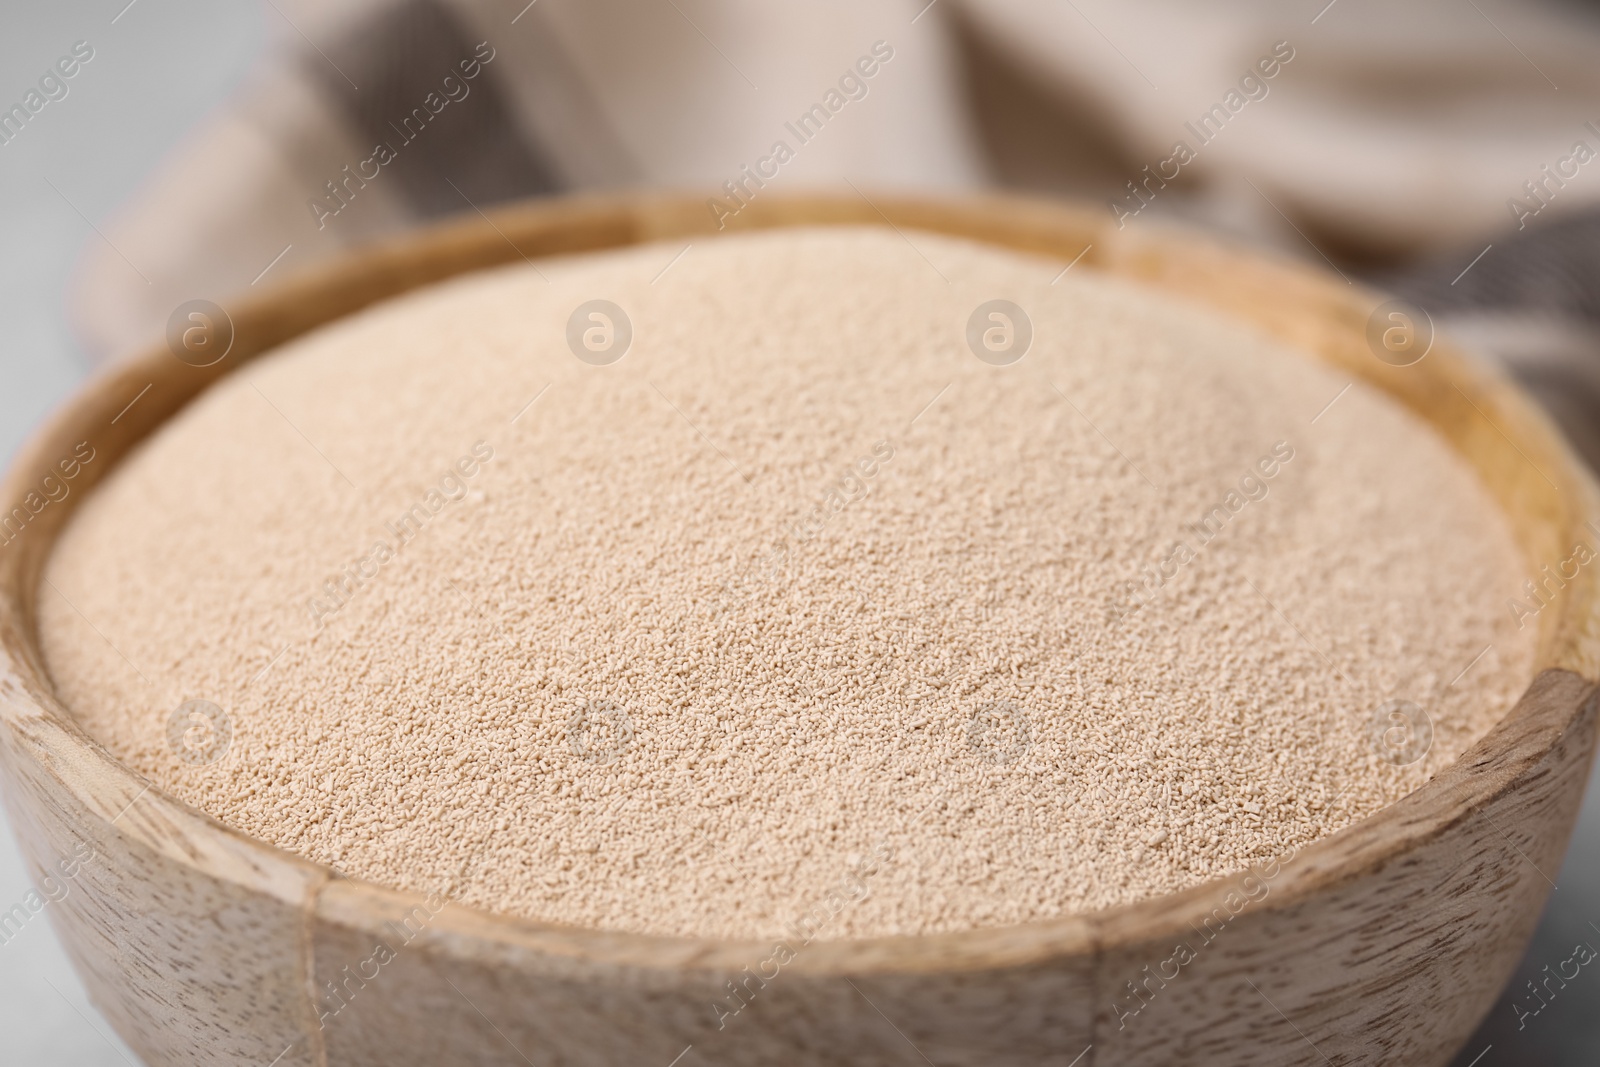 Photo of Granulated yeast in wooden bowl, closeup view